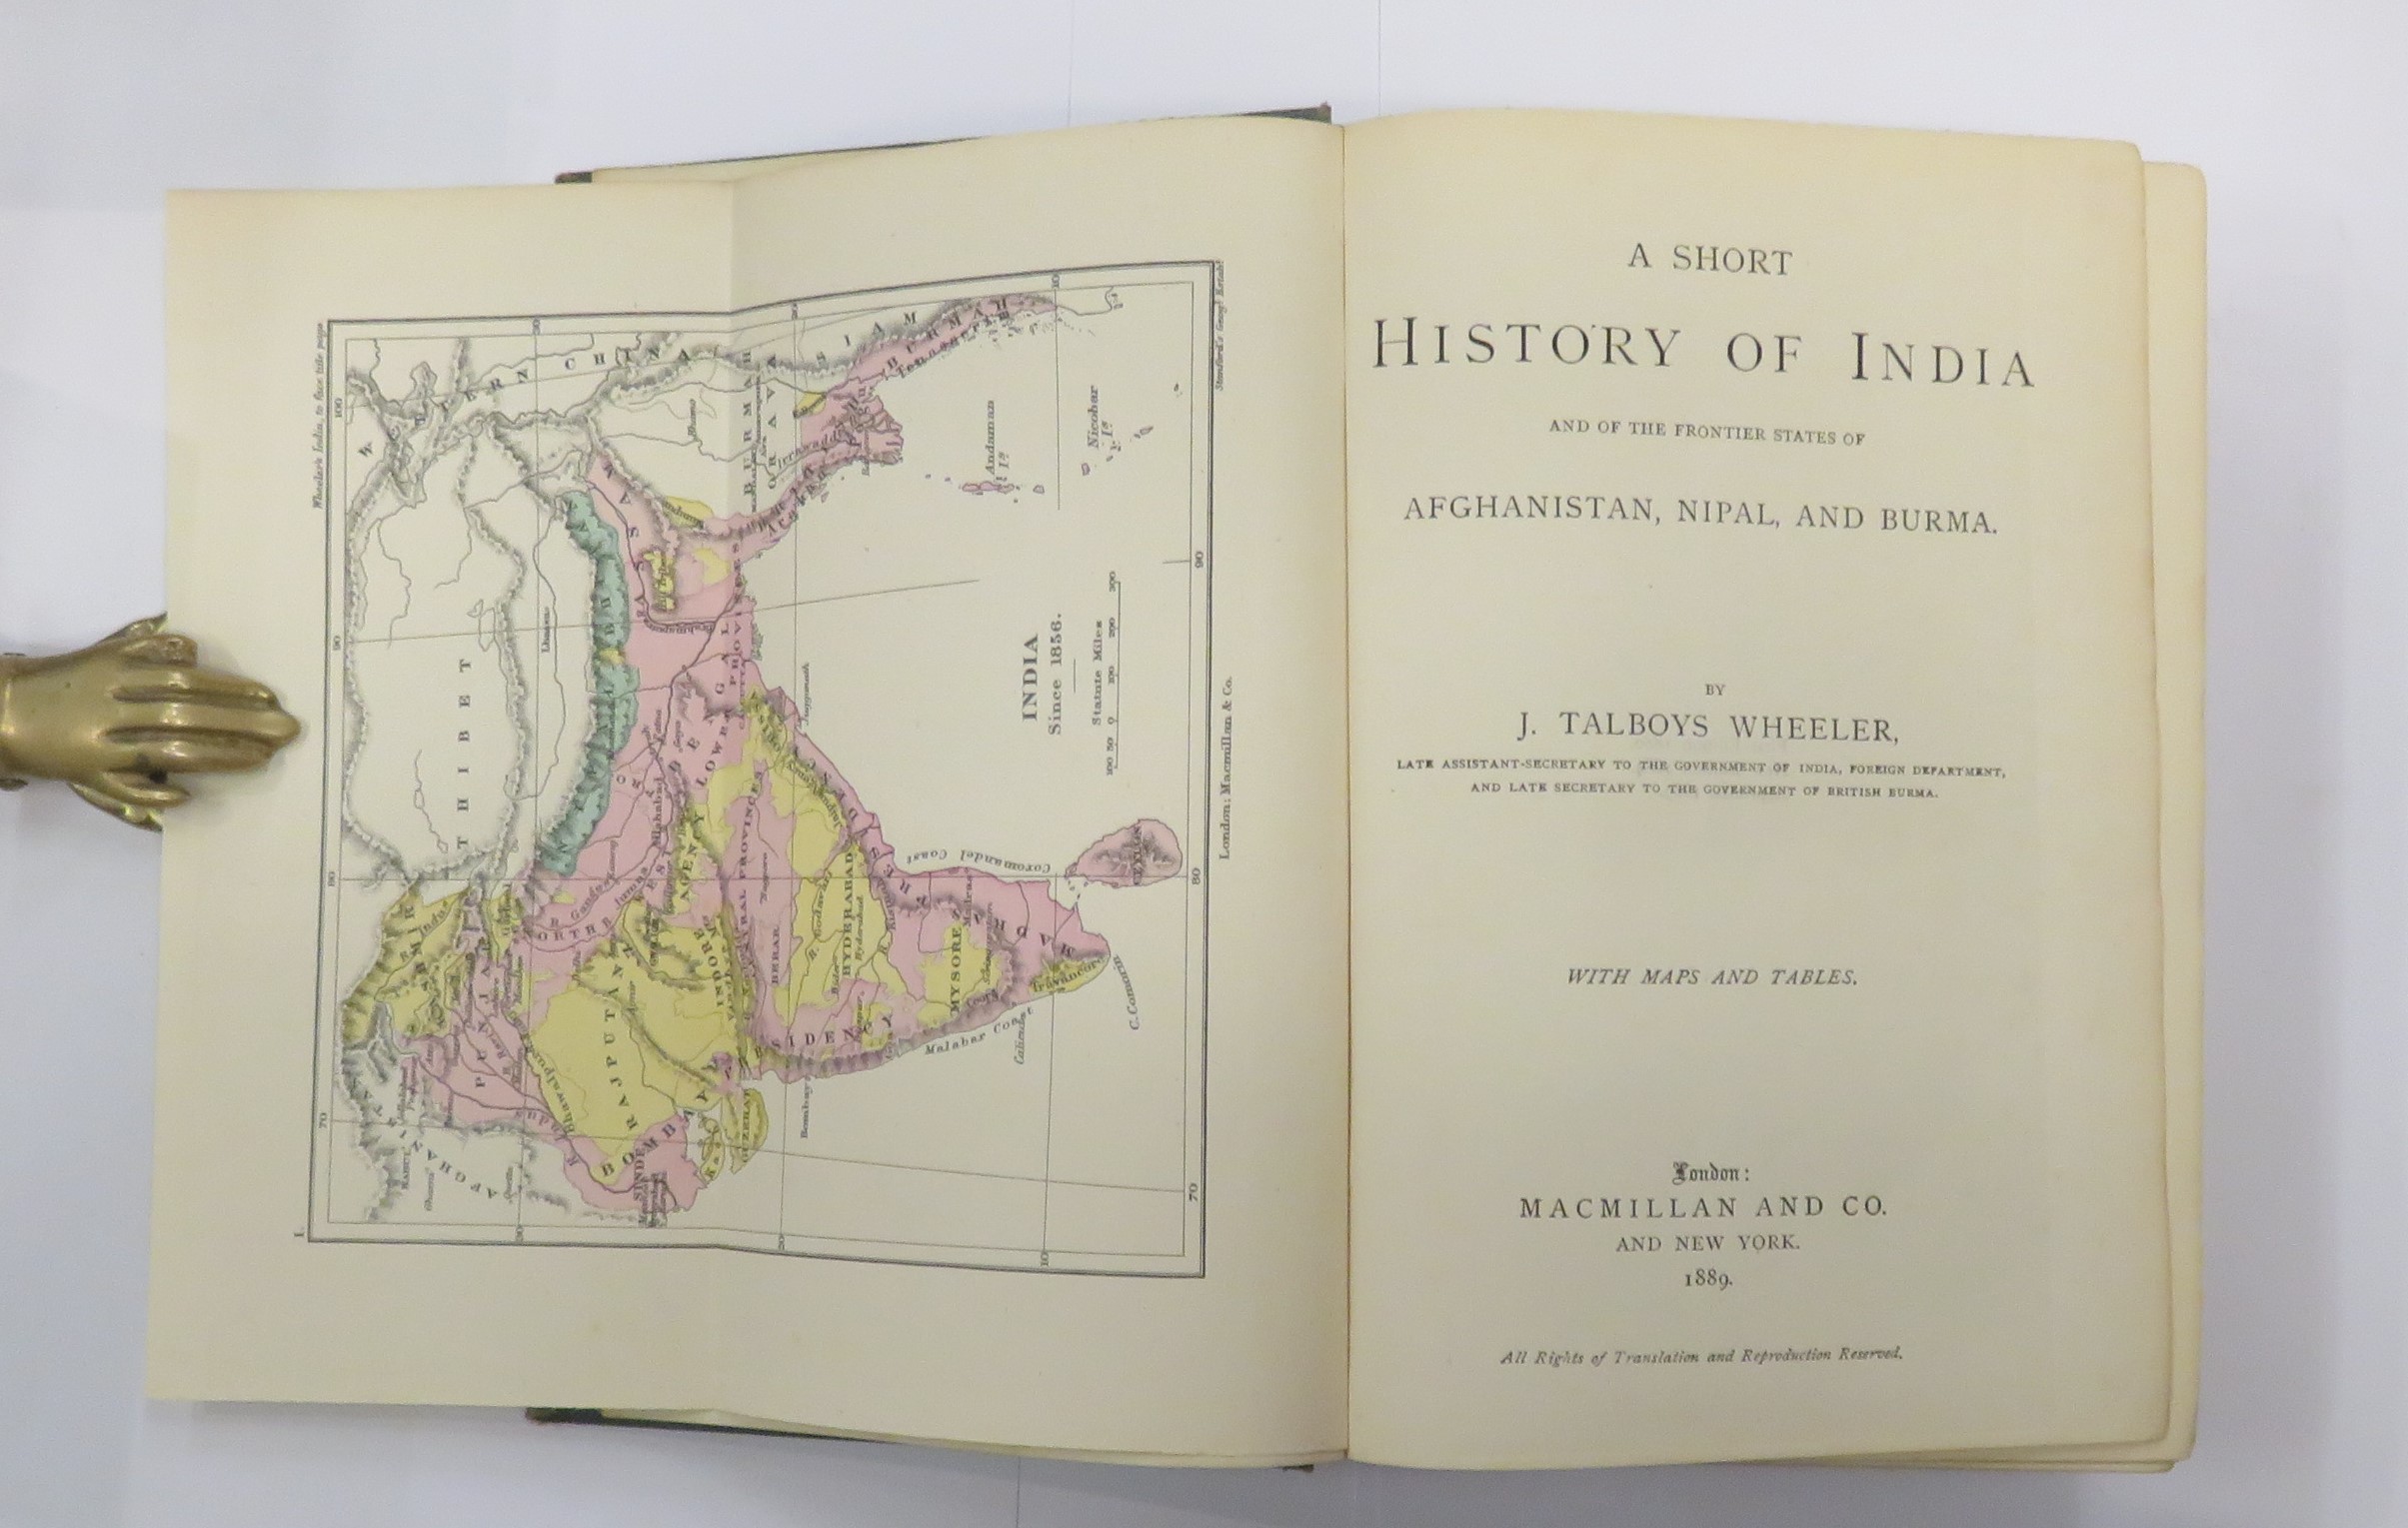 A Short History of India and The Frontier States of Afghanistan, Nipal, and Burma